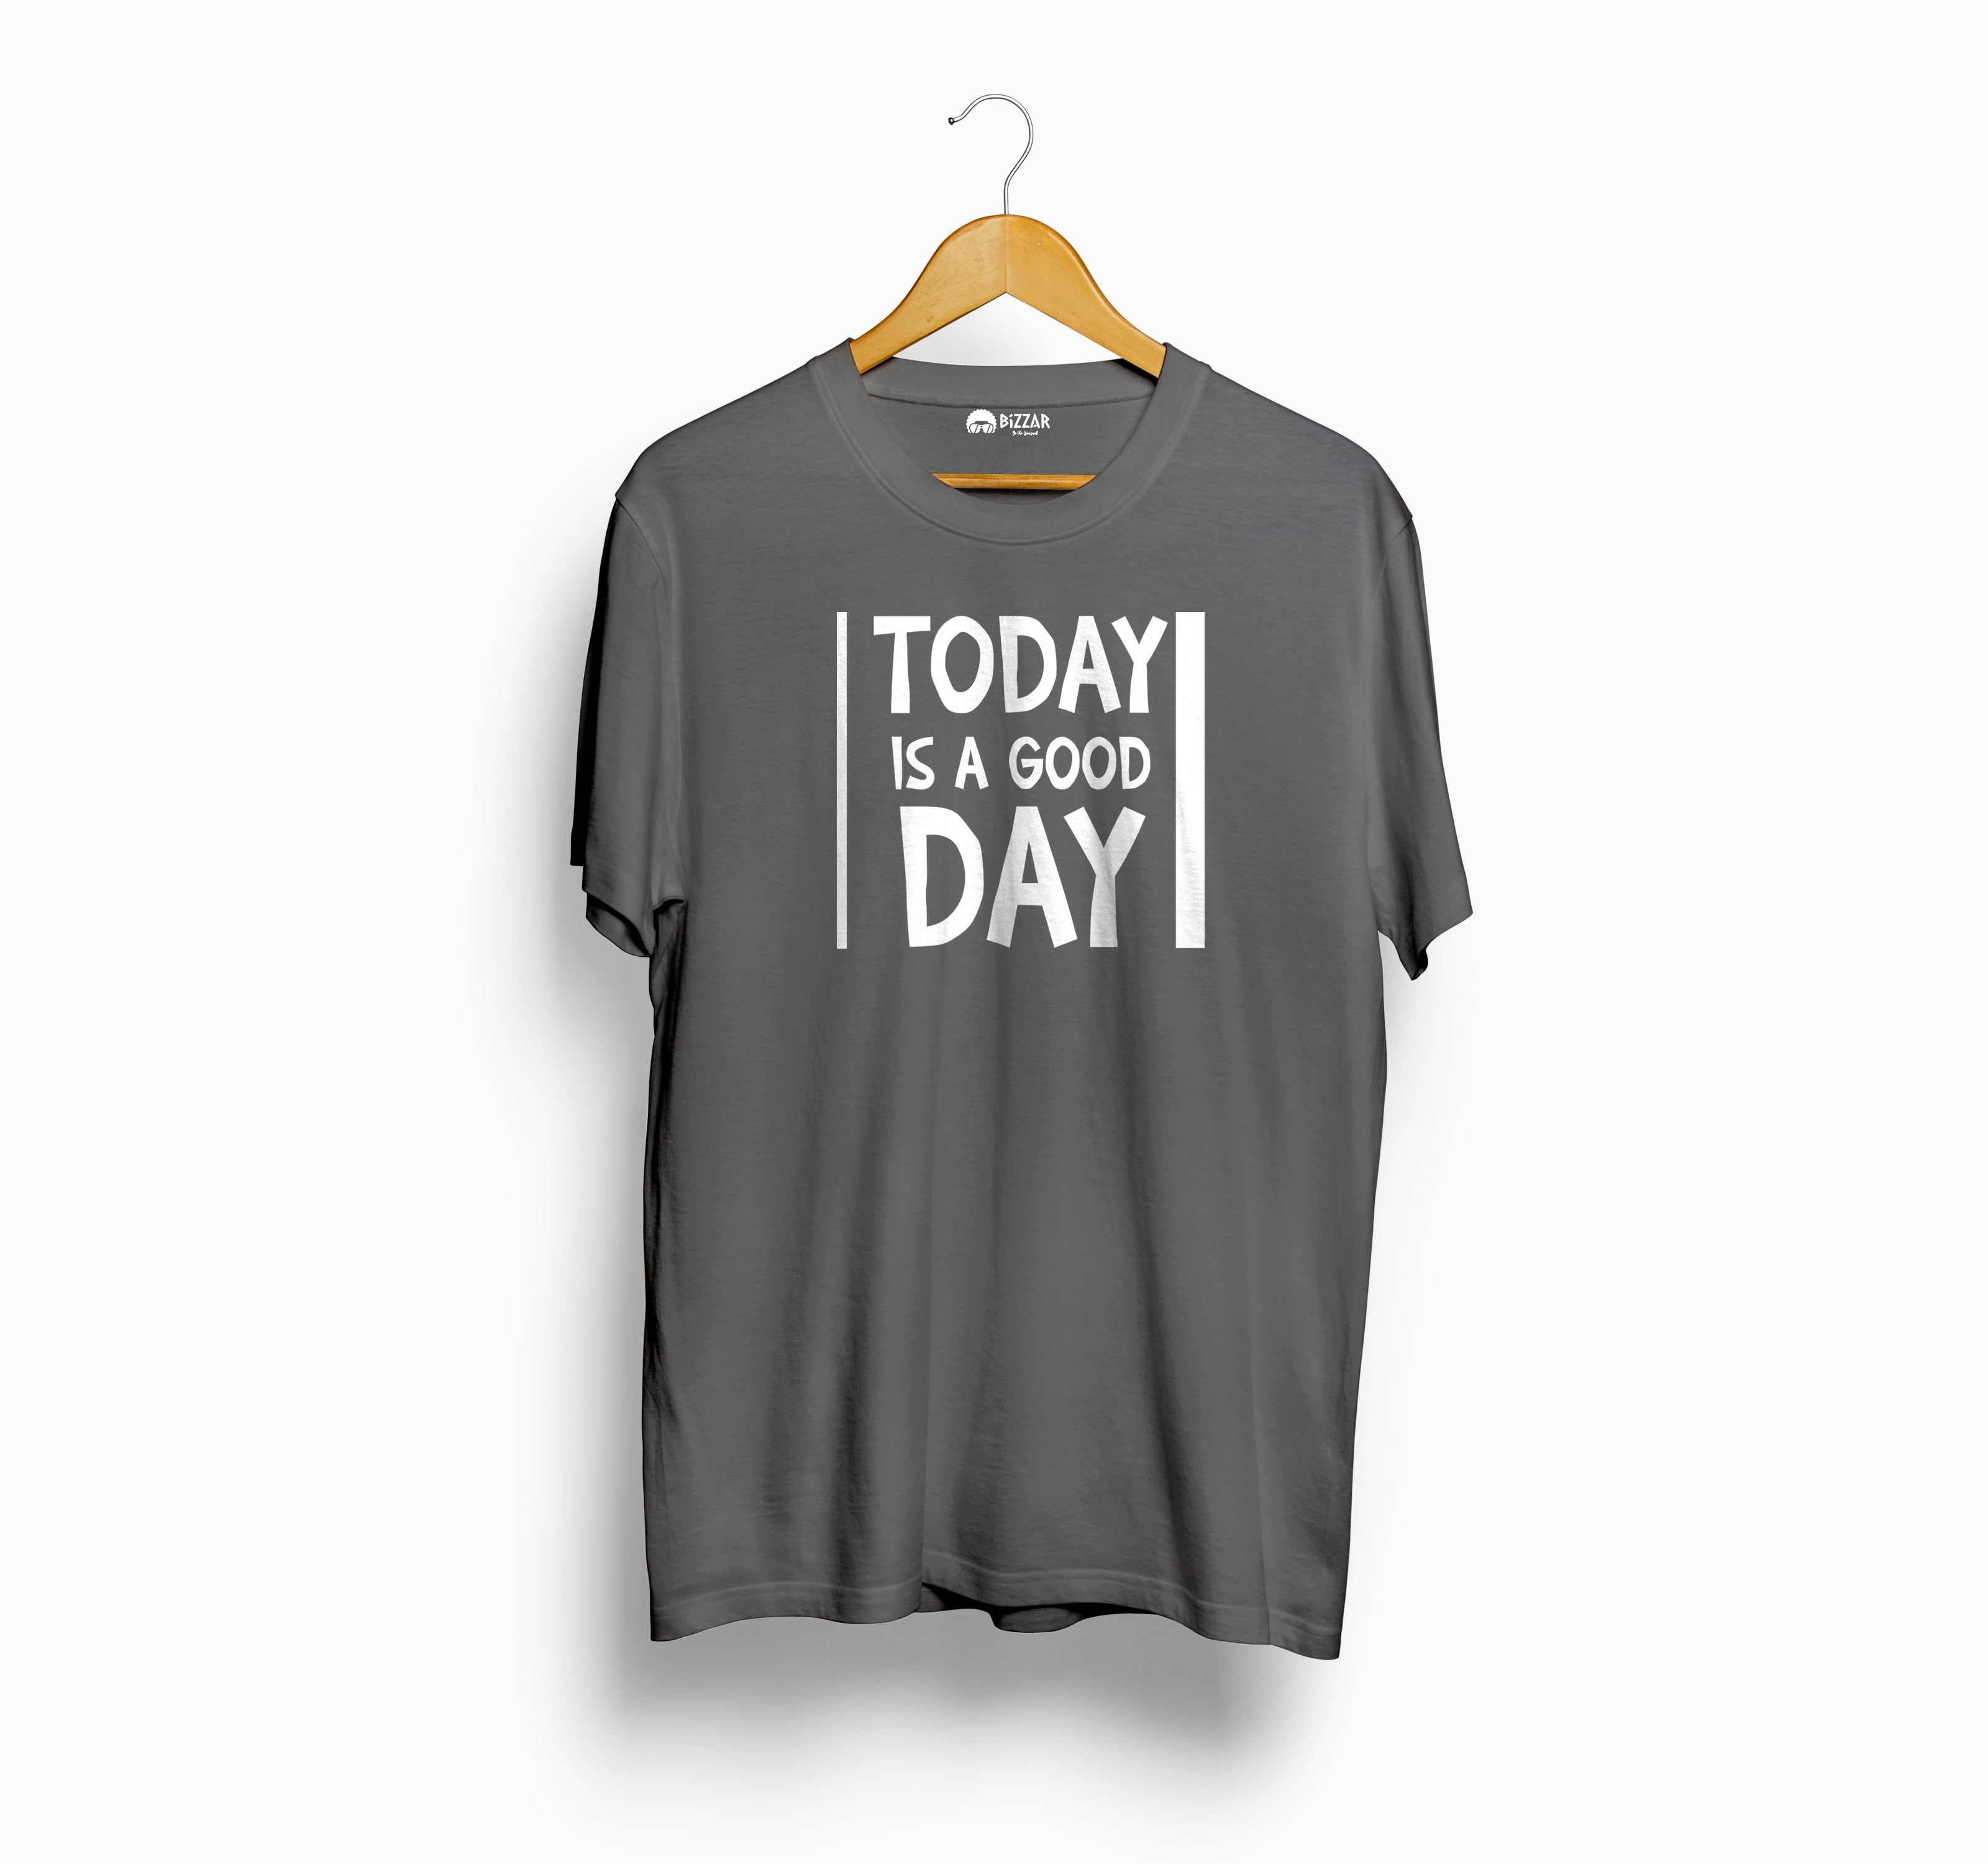 Bizzar's Today is a Good Day Charcoal Melange T-Shirt